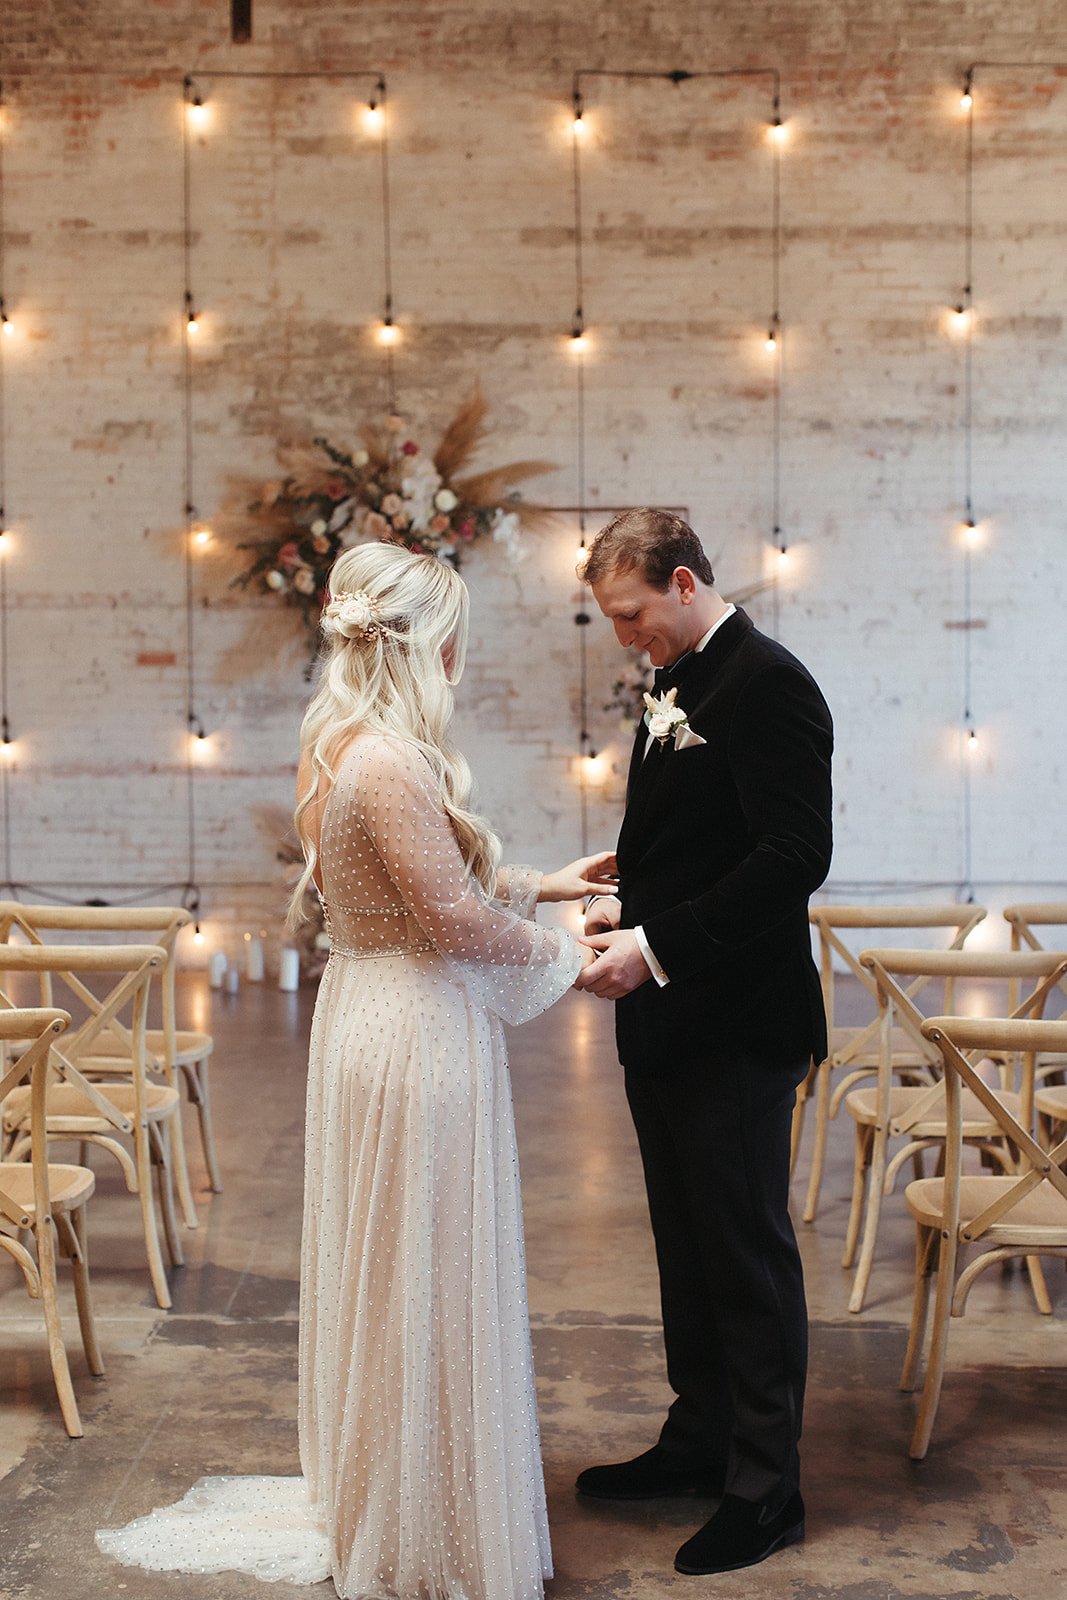  A bride wearing Lunella by Willowby by Watters having a first look with the groom on their wedding day. They are in a warehouse venue with light wash wood x-back chairs and hanging bistro lights in the background. 